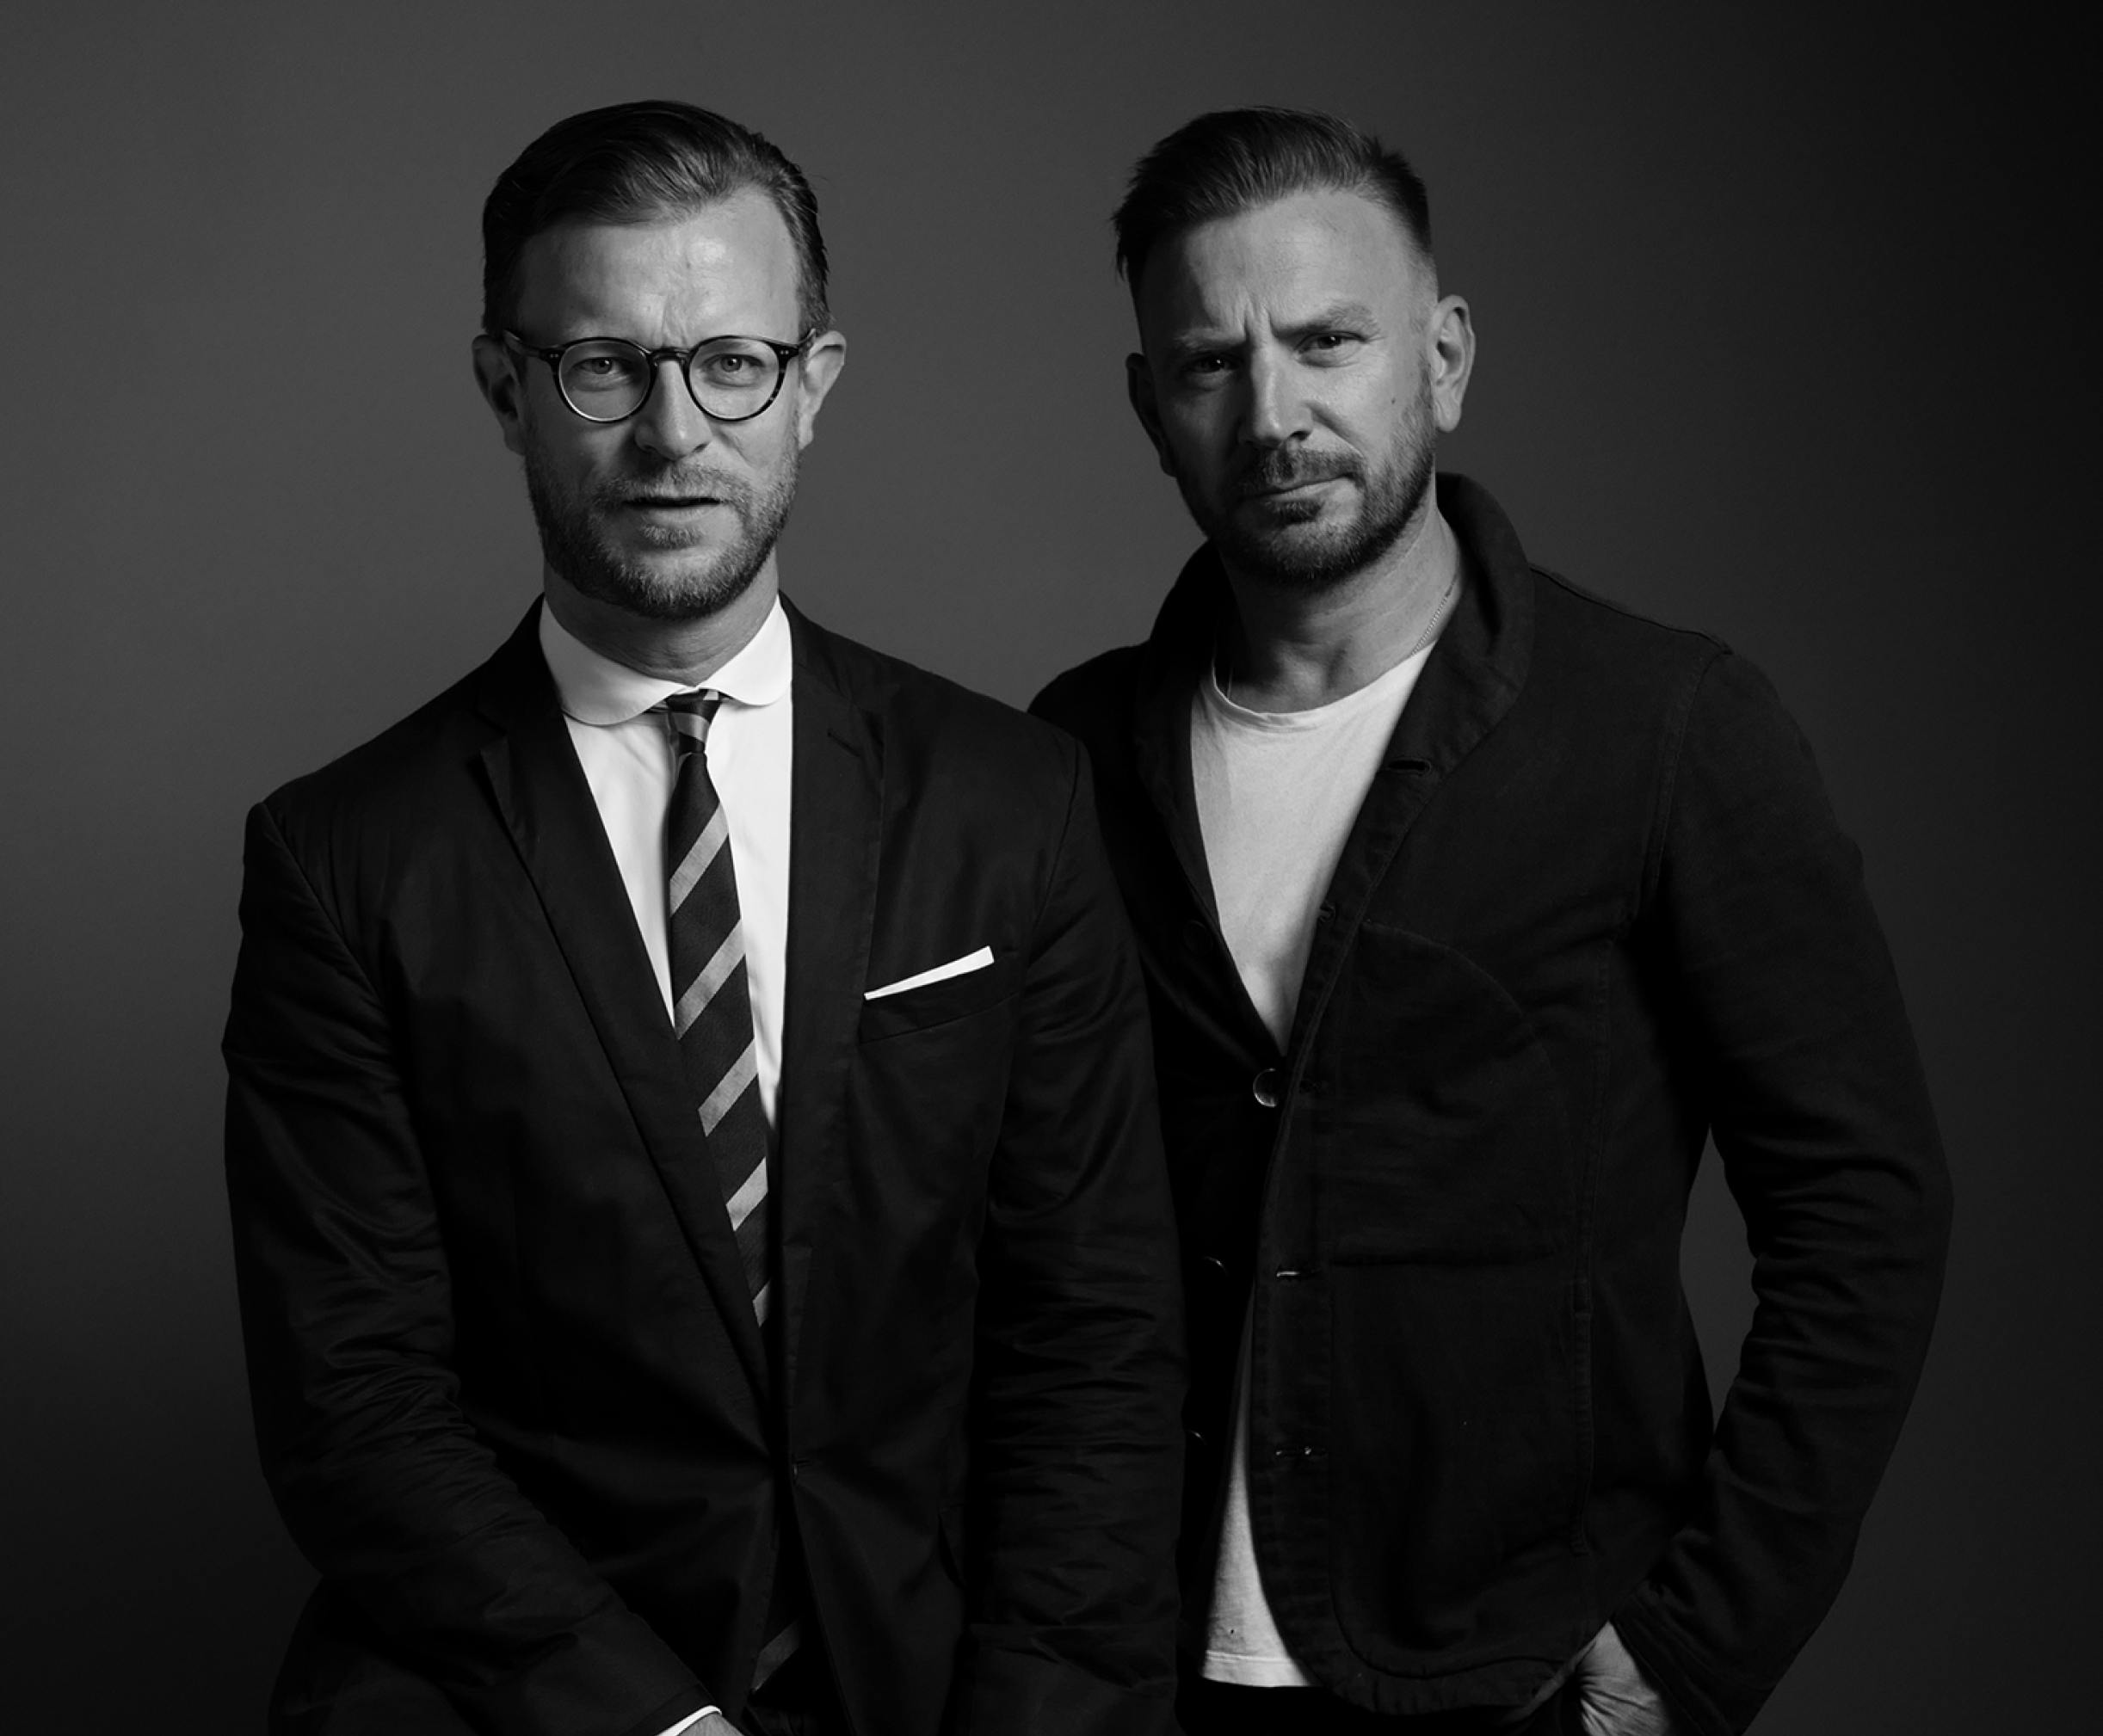 Saunders and Long: The Men Behind Grooming's Disruptive New Brand